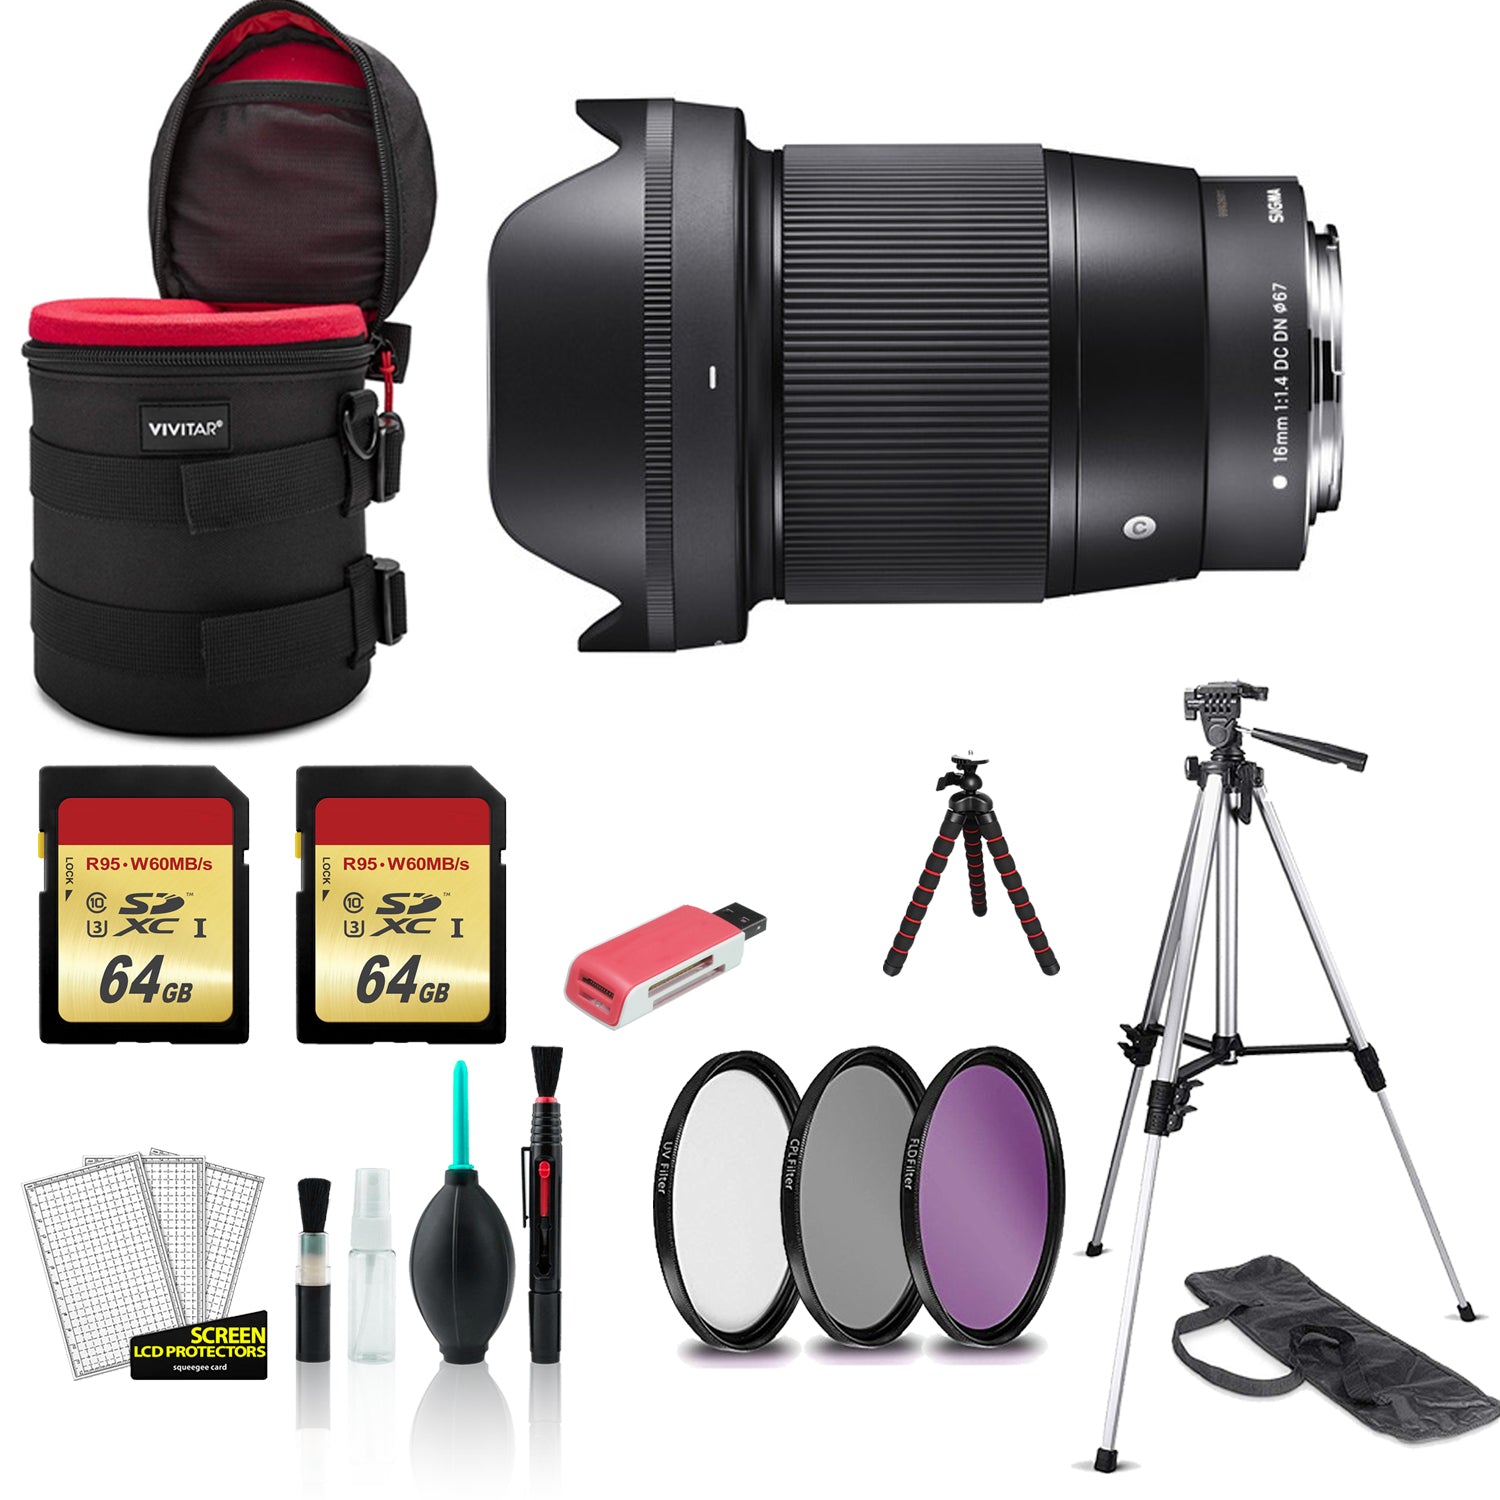 Sigma 16mm Contemporary Lens f/1.4 DC DN for Sony E 402965 with 2x 64GB Memory Card + Tripod Bundle